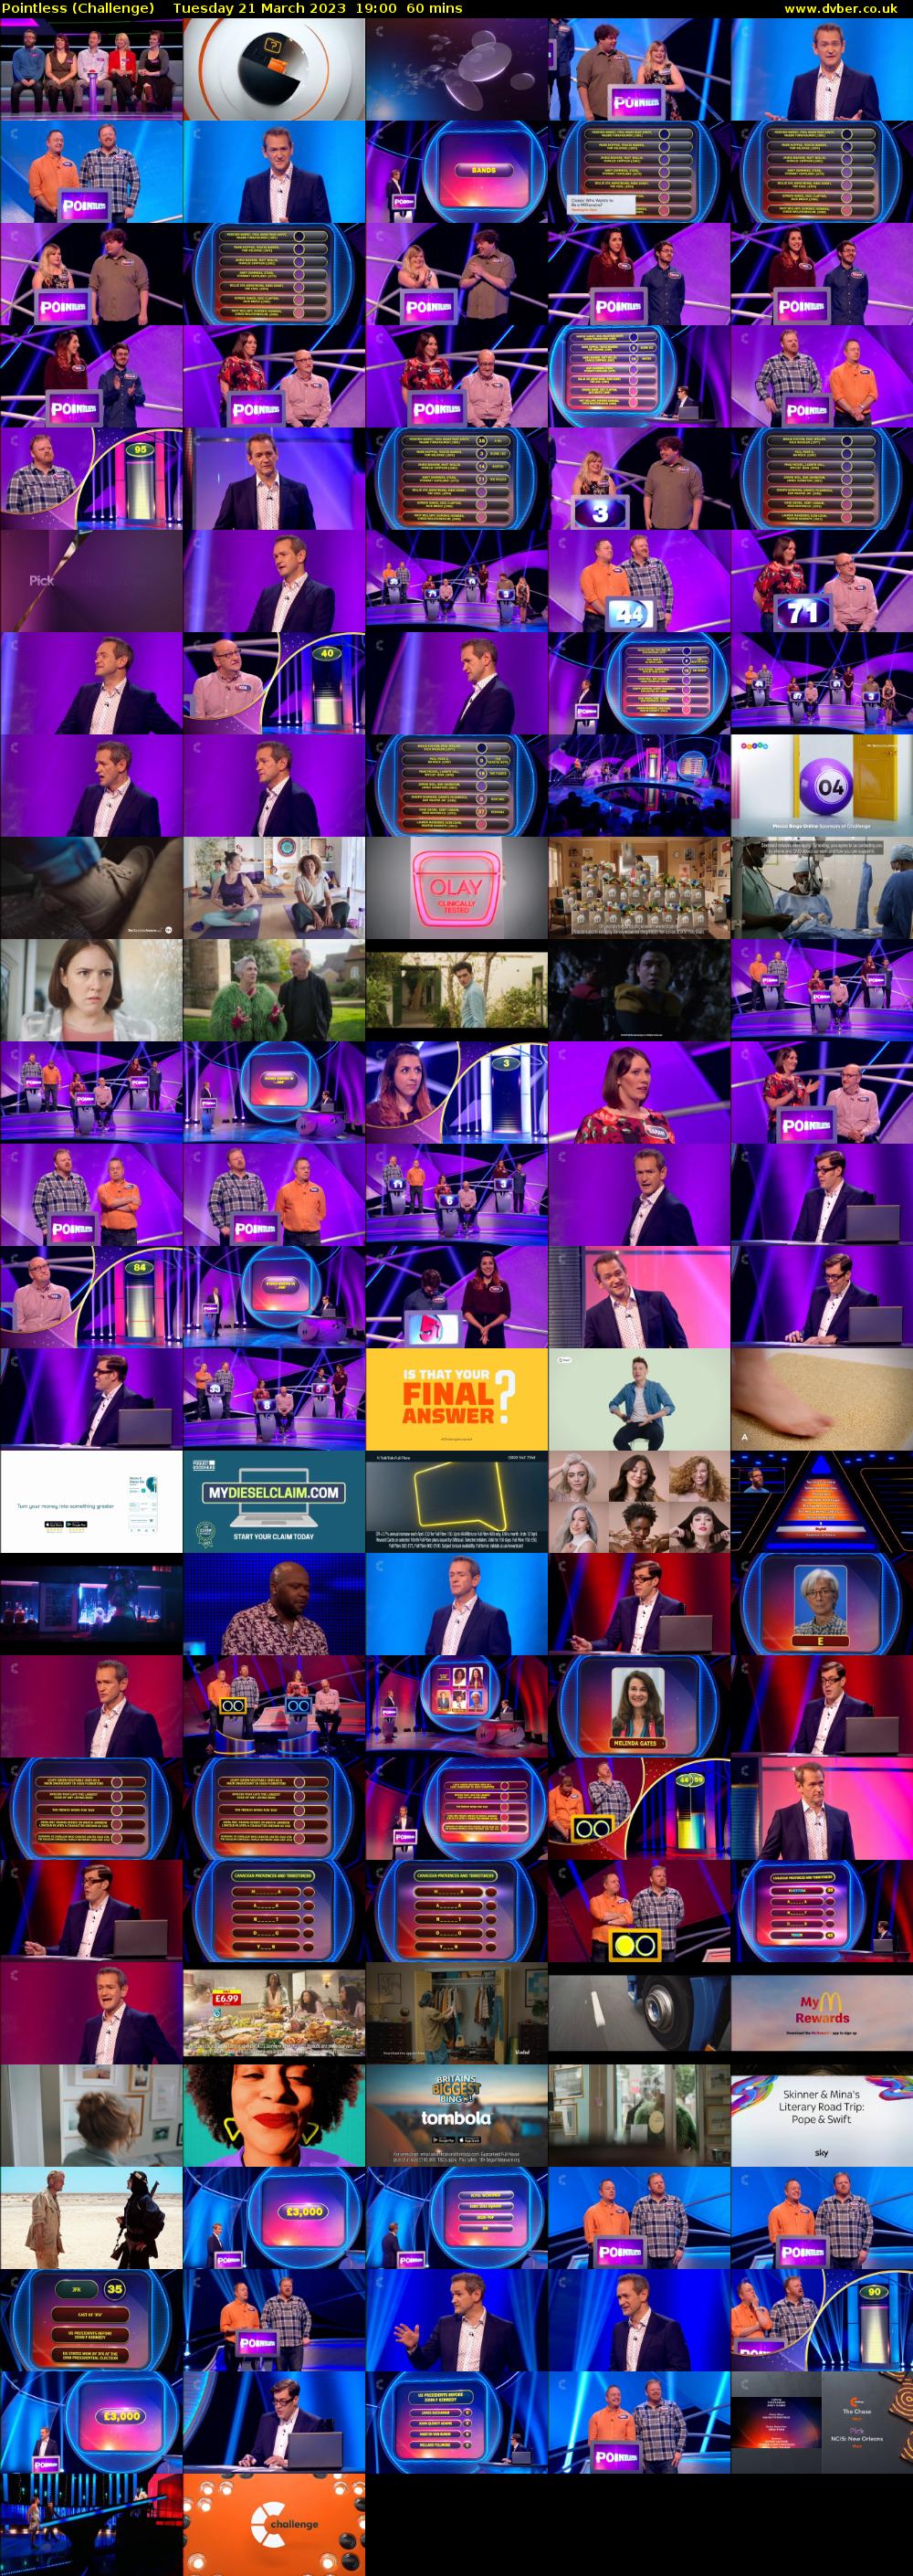 Pointless (Challenge) Tuesday 21 March 2023 19:00 - 20:00